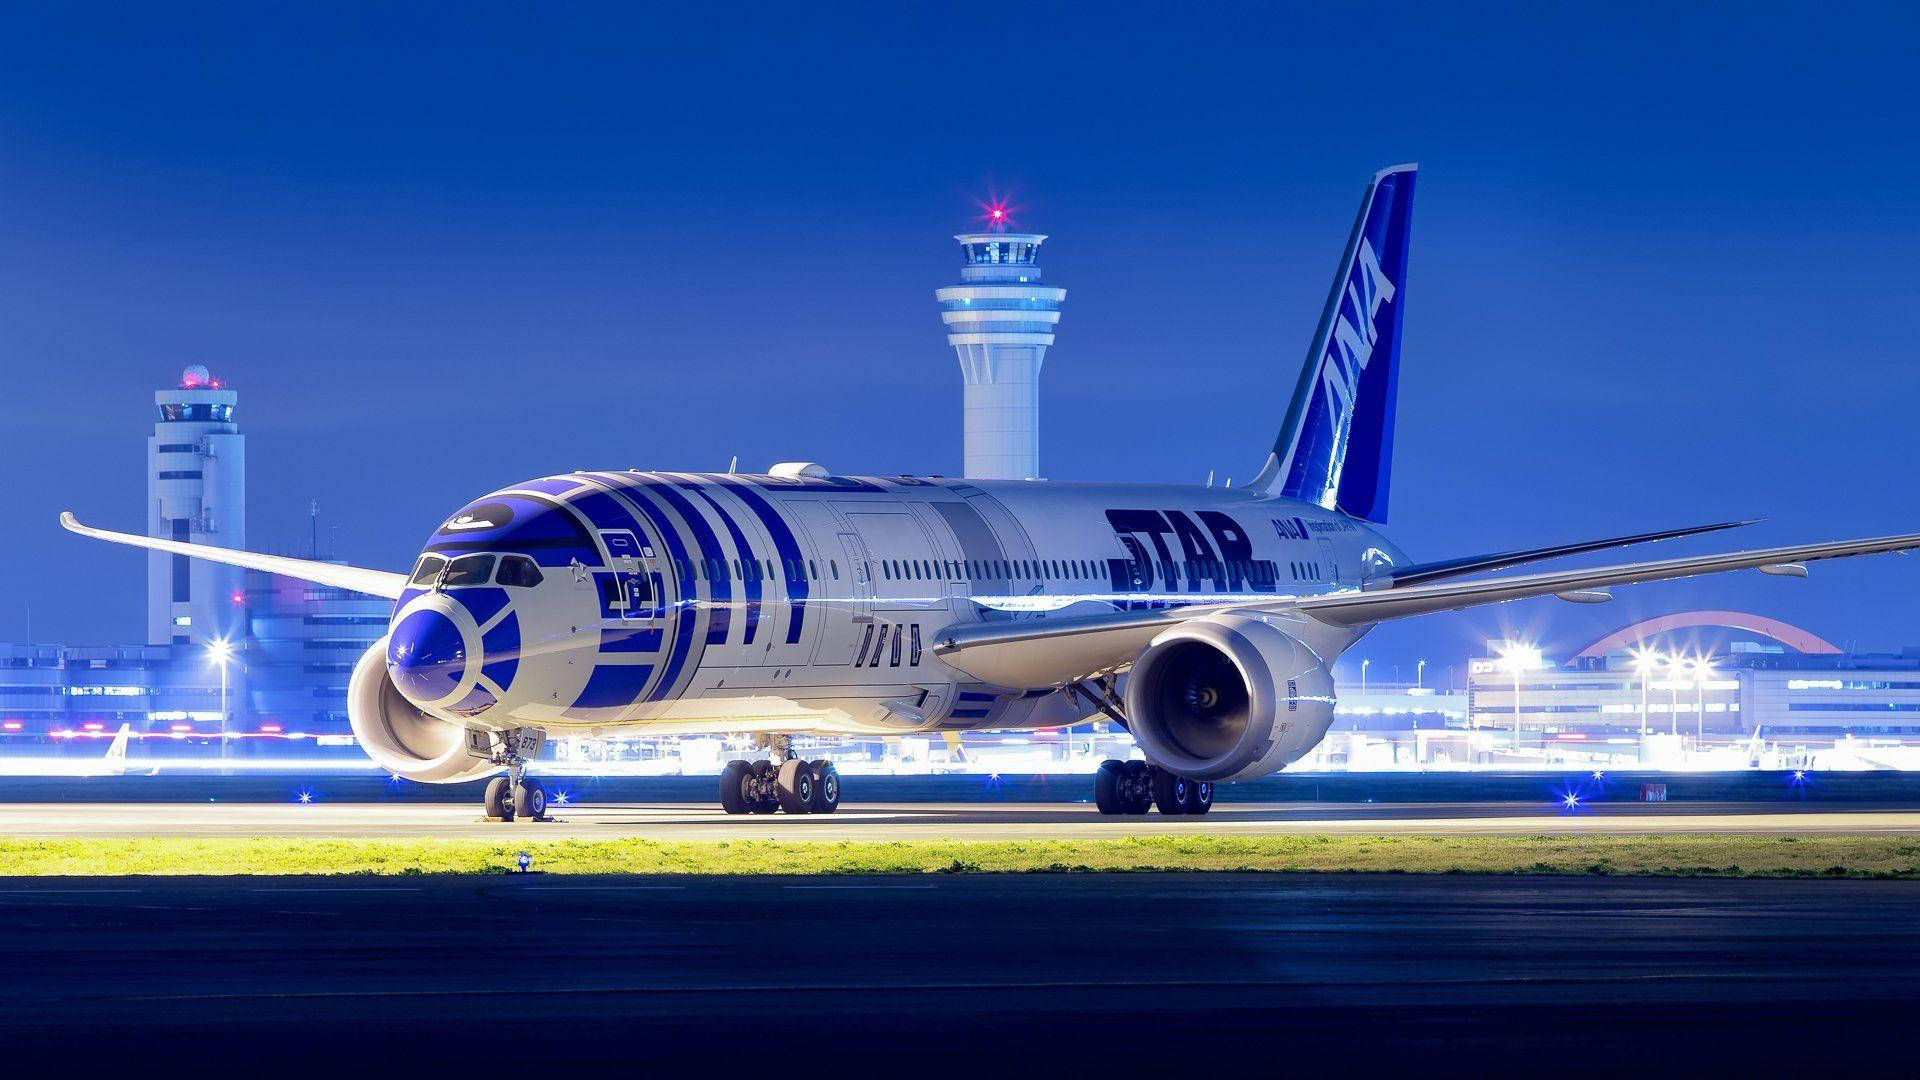 Magnificent Ana Airplane At Night